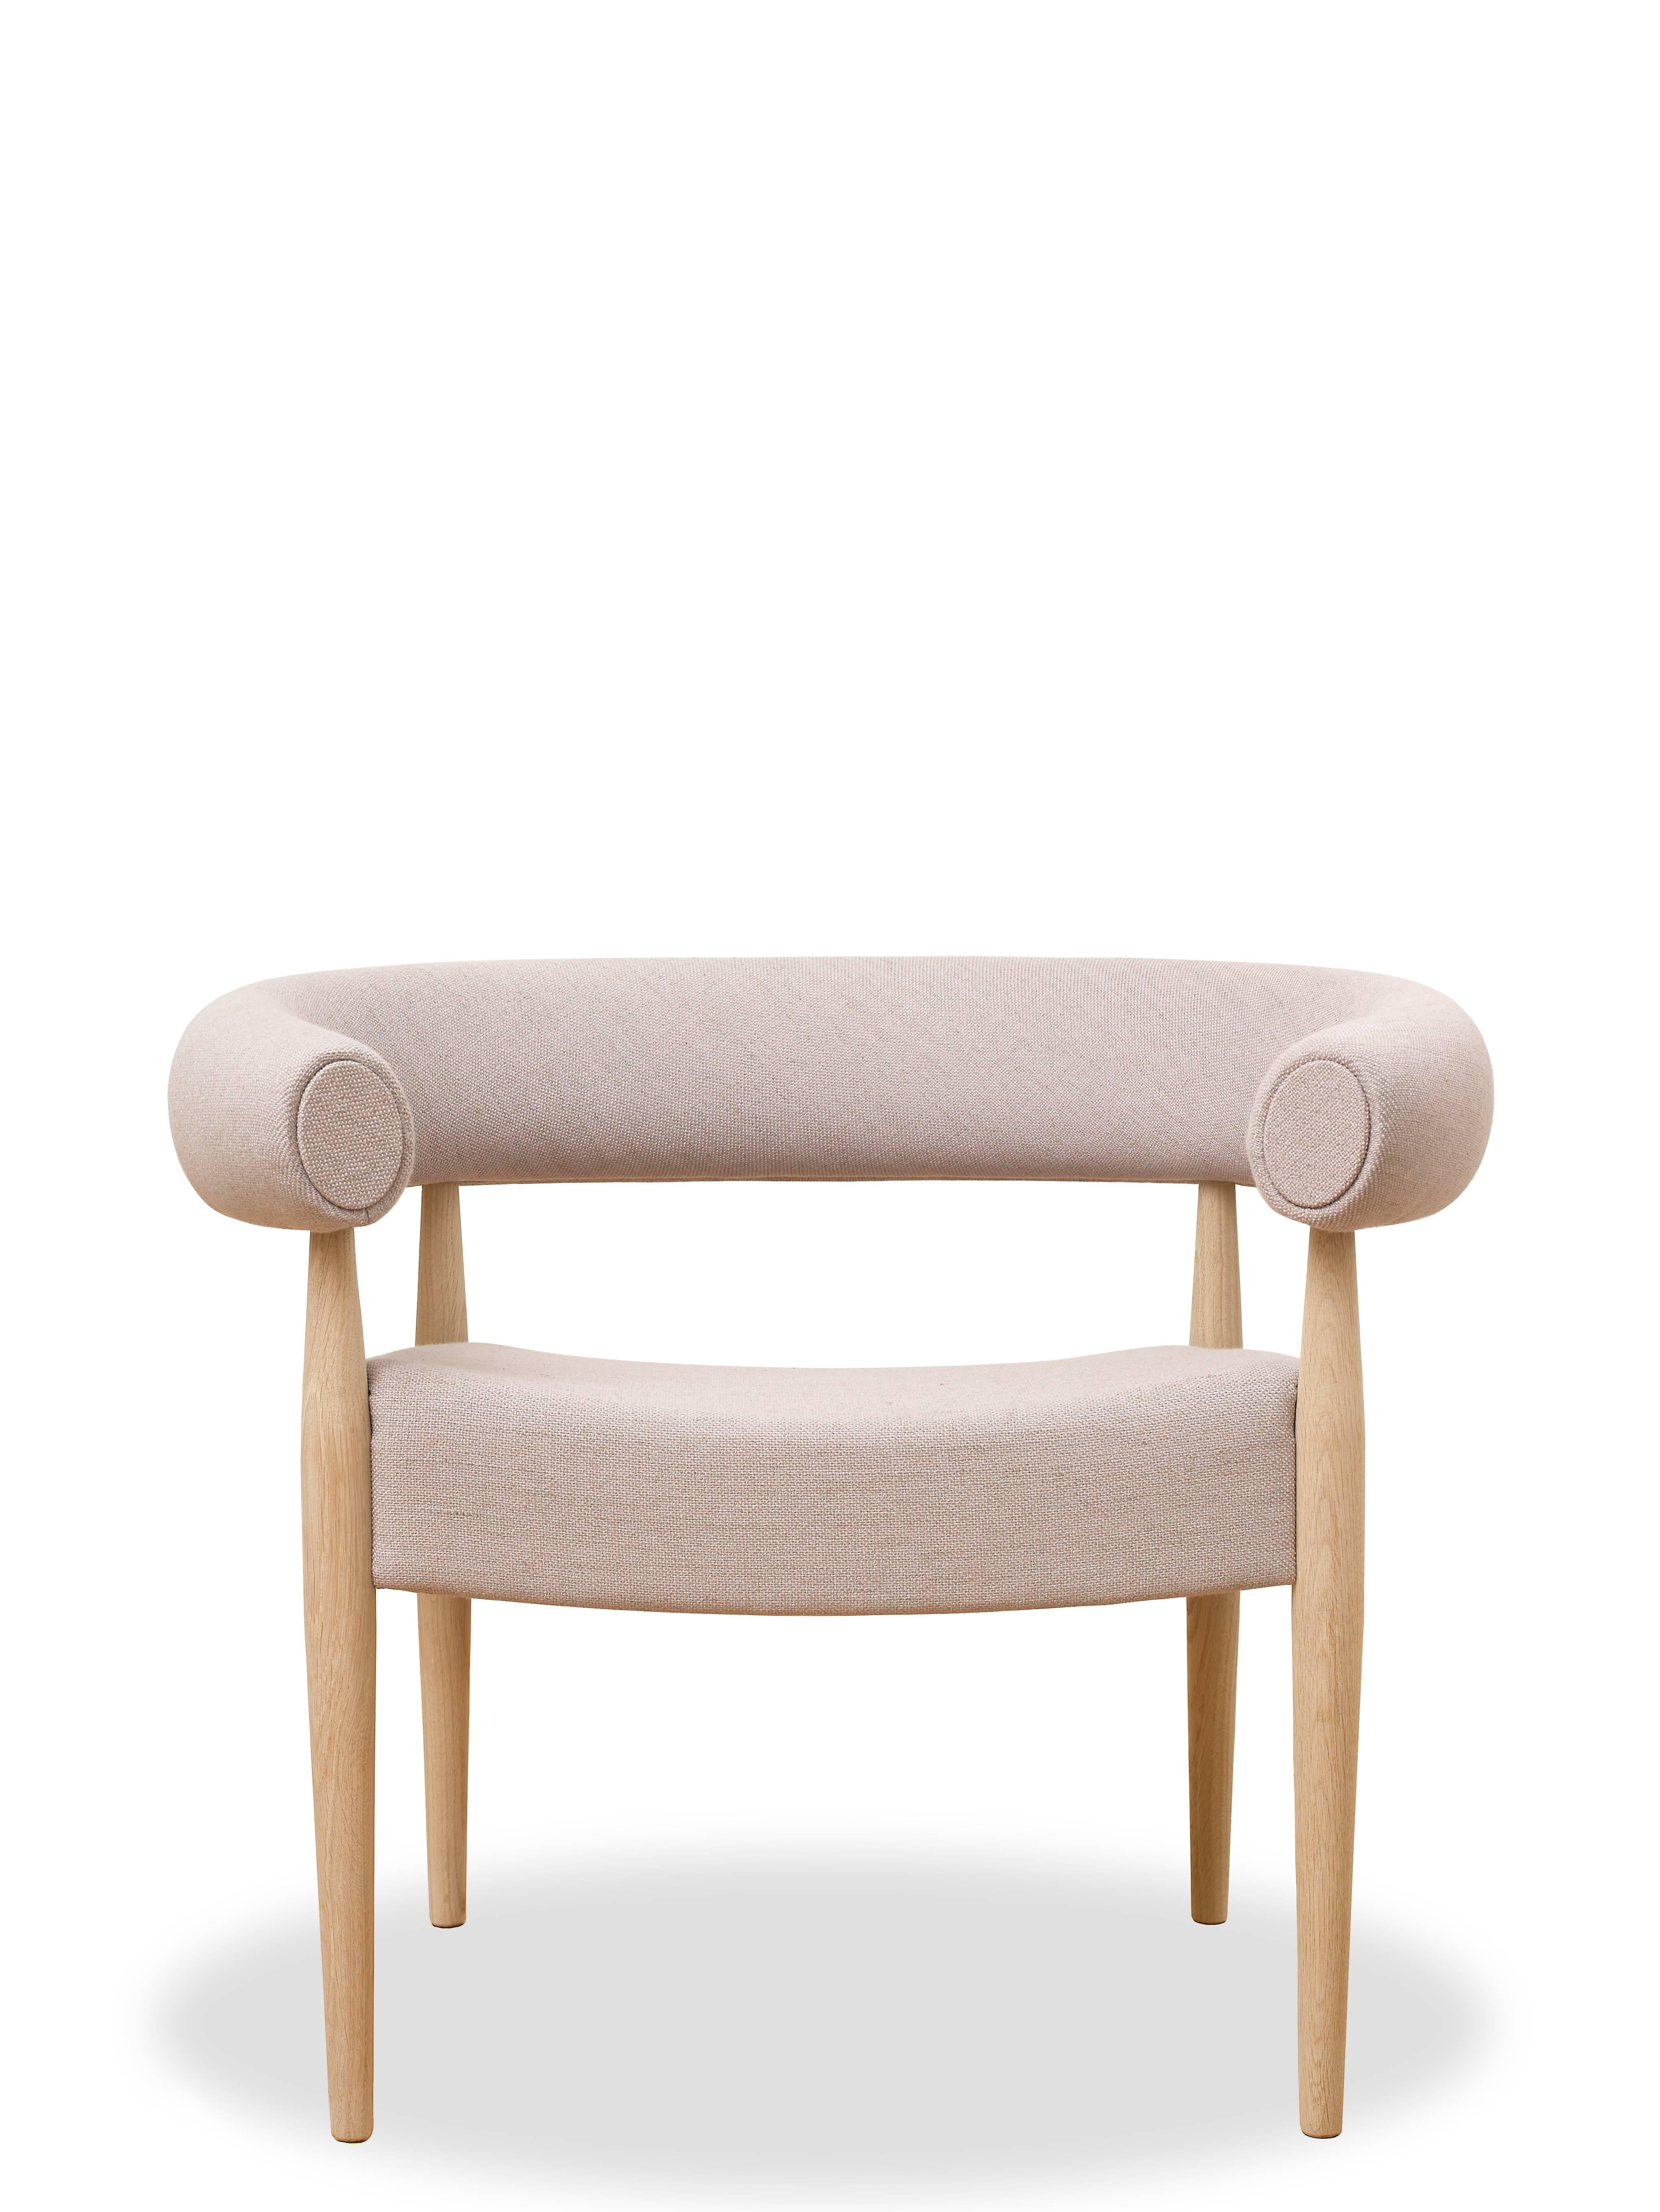 Nanna Ditzel (1923-2005). Ring chair in oak with seat and back upholstered in fabric from Kvadrat . Designed in 1958. Manufactured by GETAMA in Denmark. It is possible to choose any color and type of fabric or leather for the chair. It is also